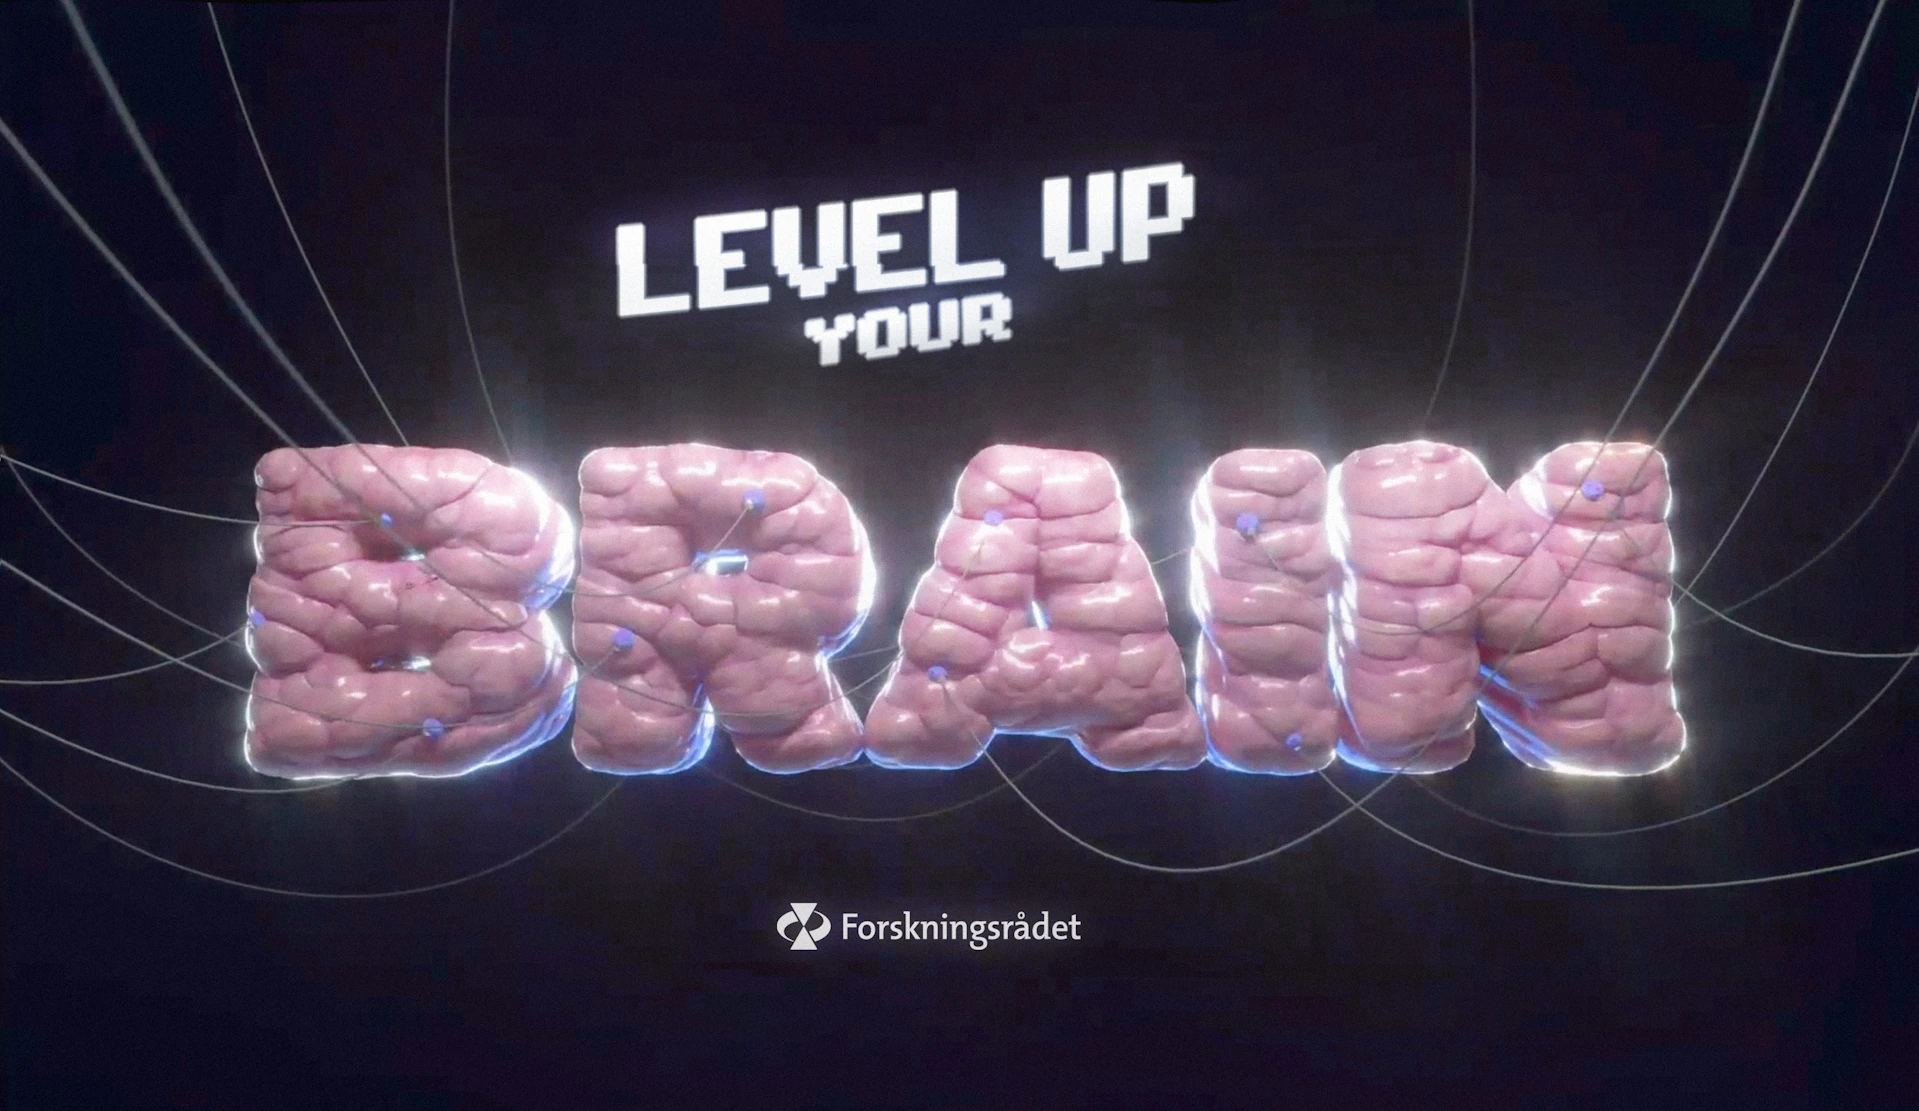 Xw Jkrq Zp Level up your brain pres board